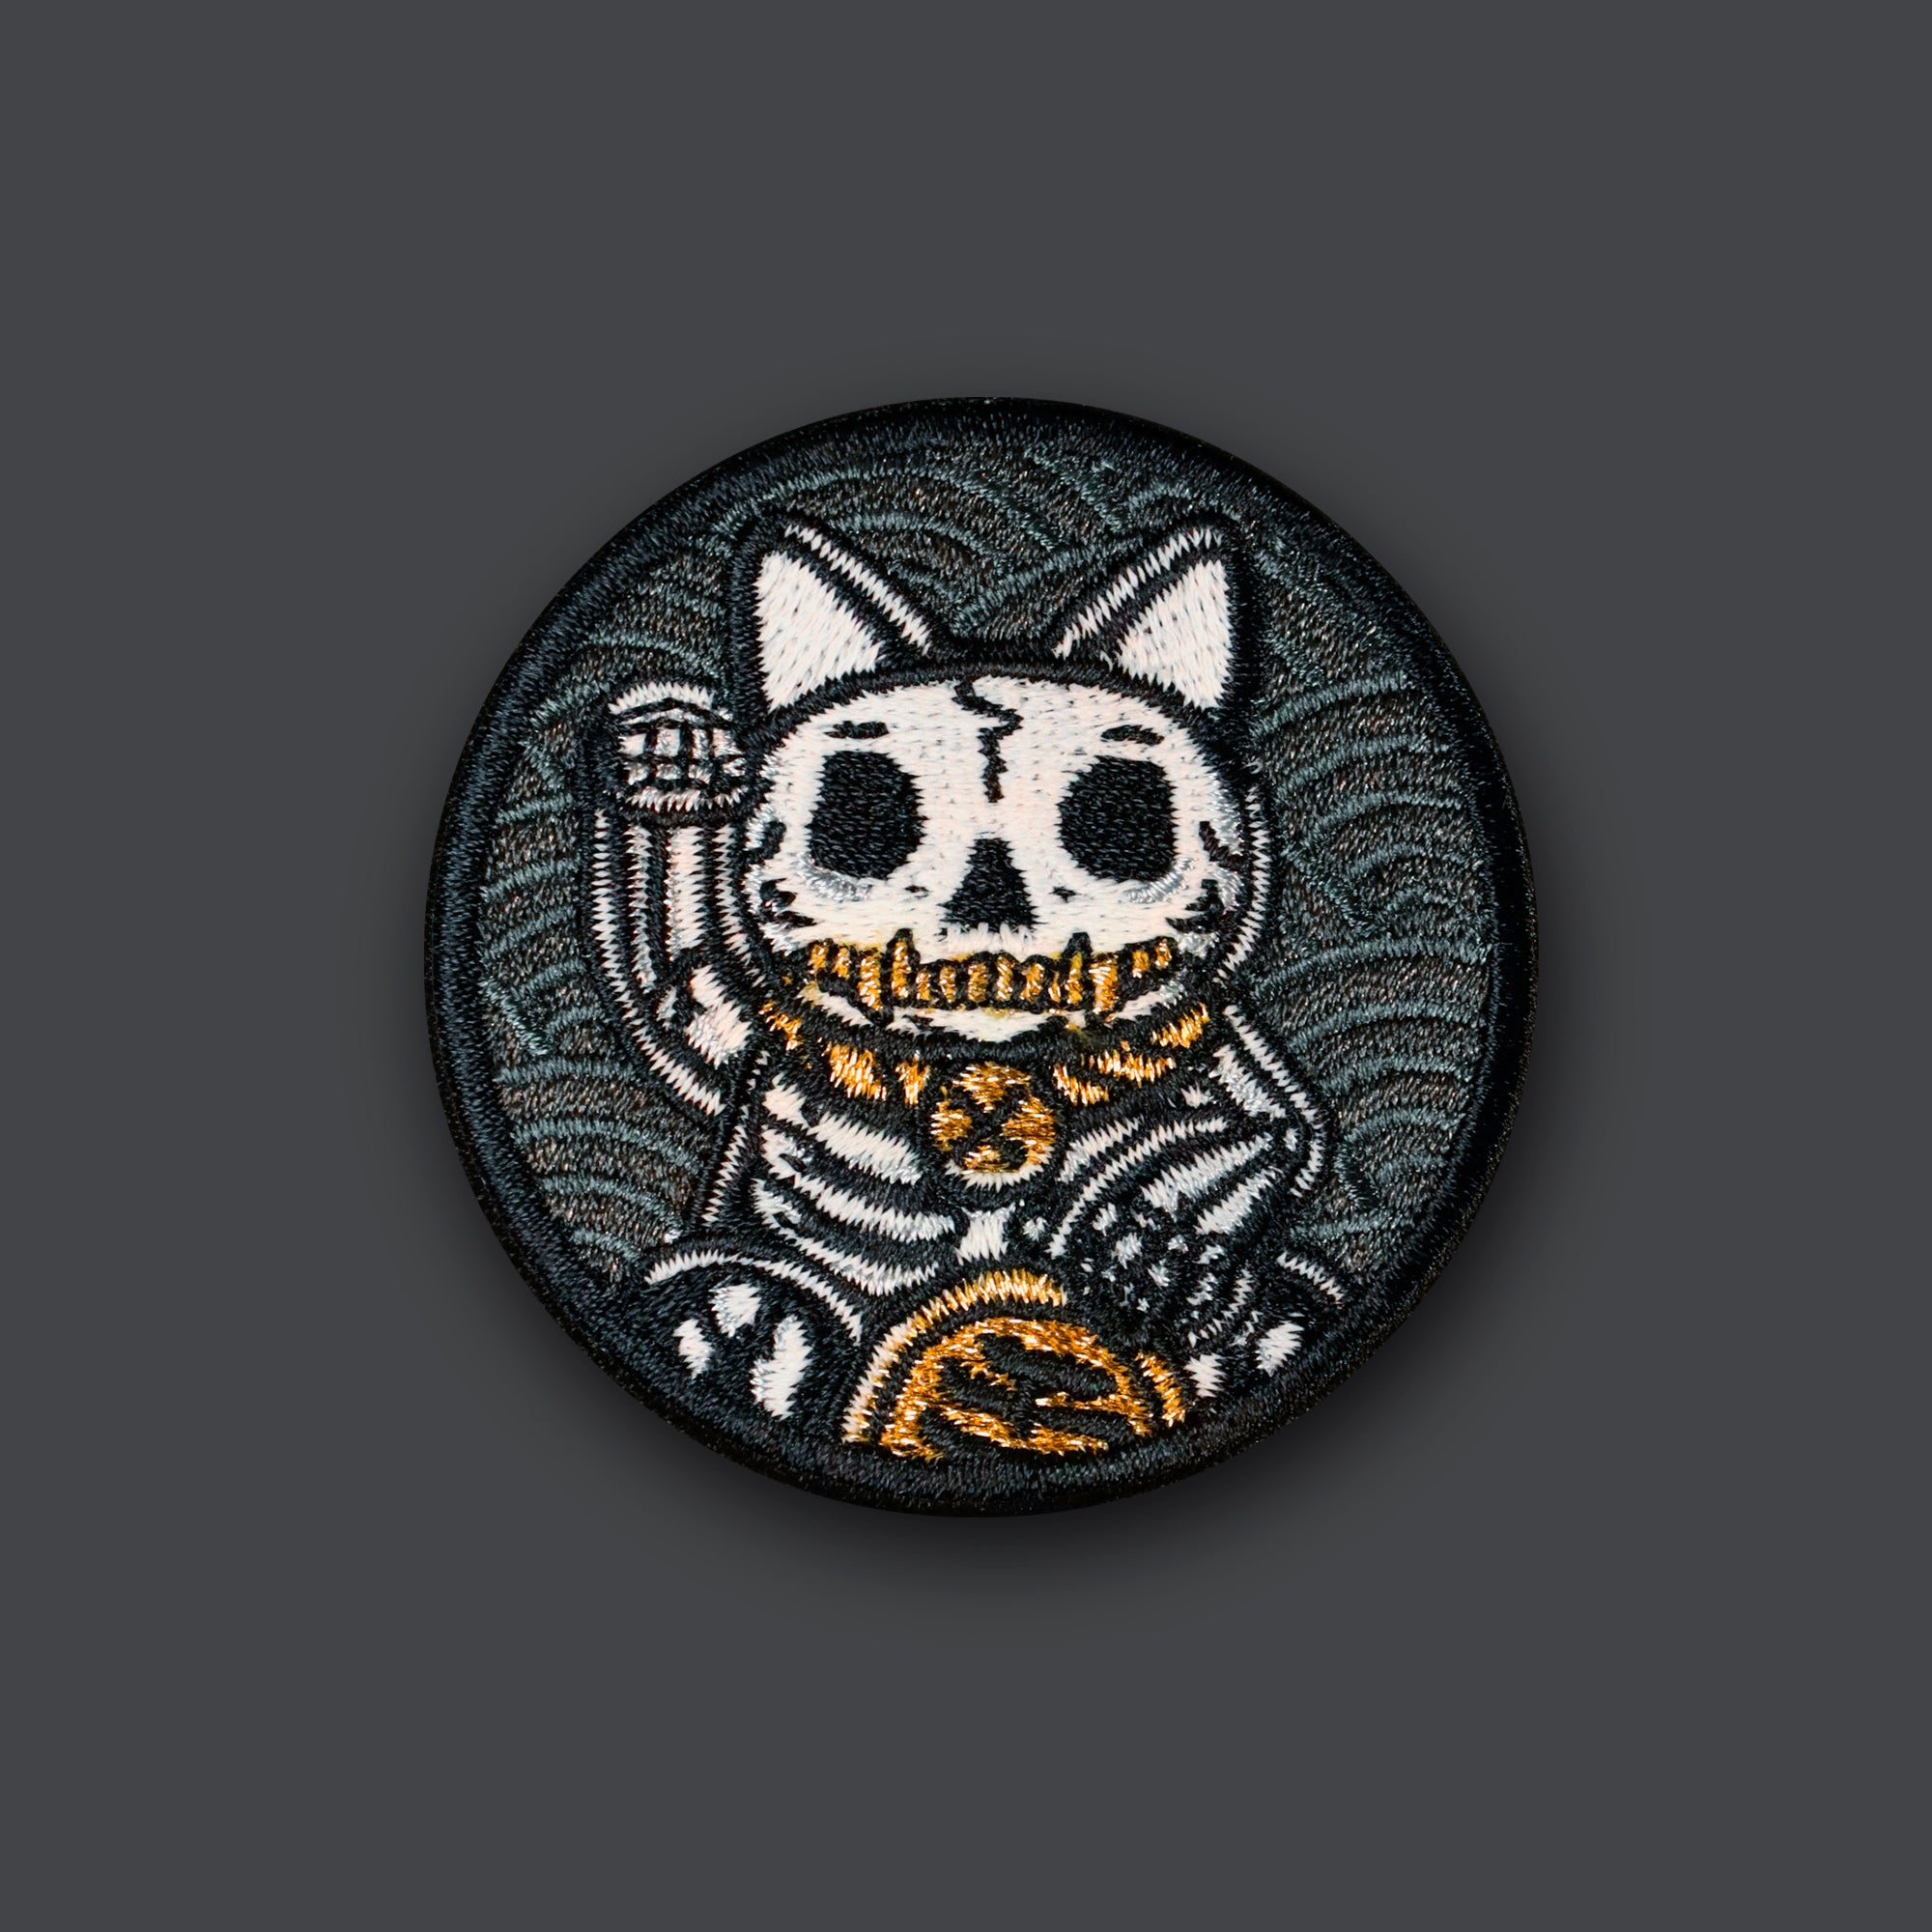 AONO Cat Patch (Limited)  Cat patch, Morale patch, Tactical patches